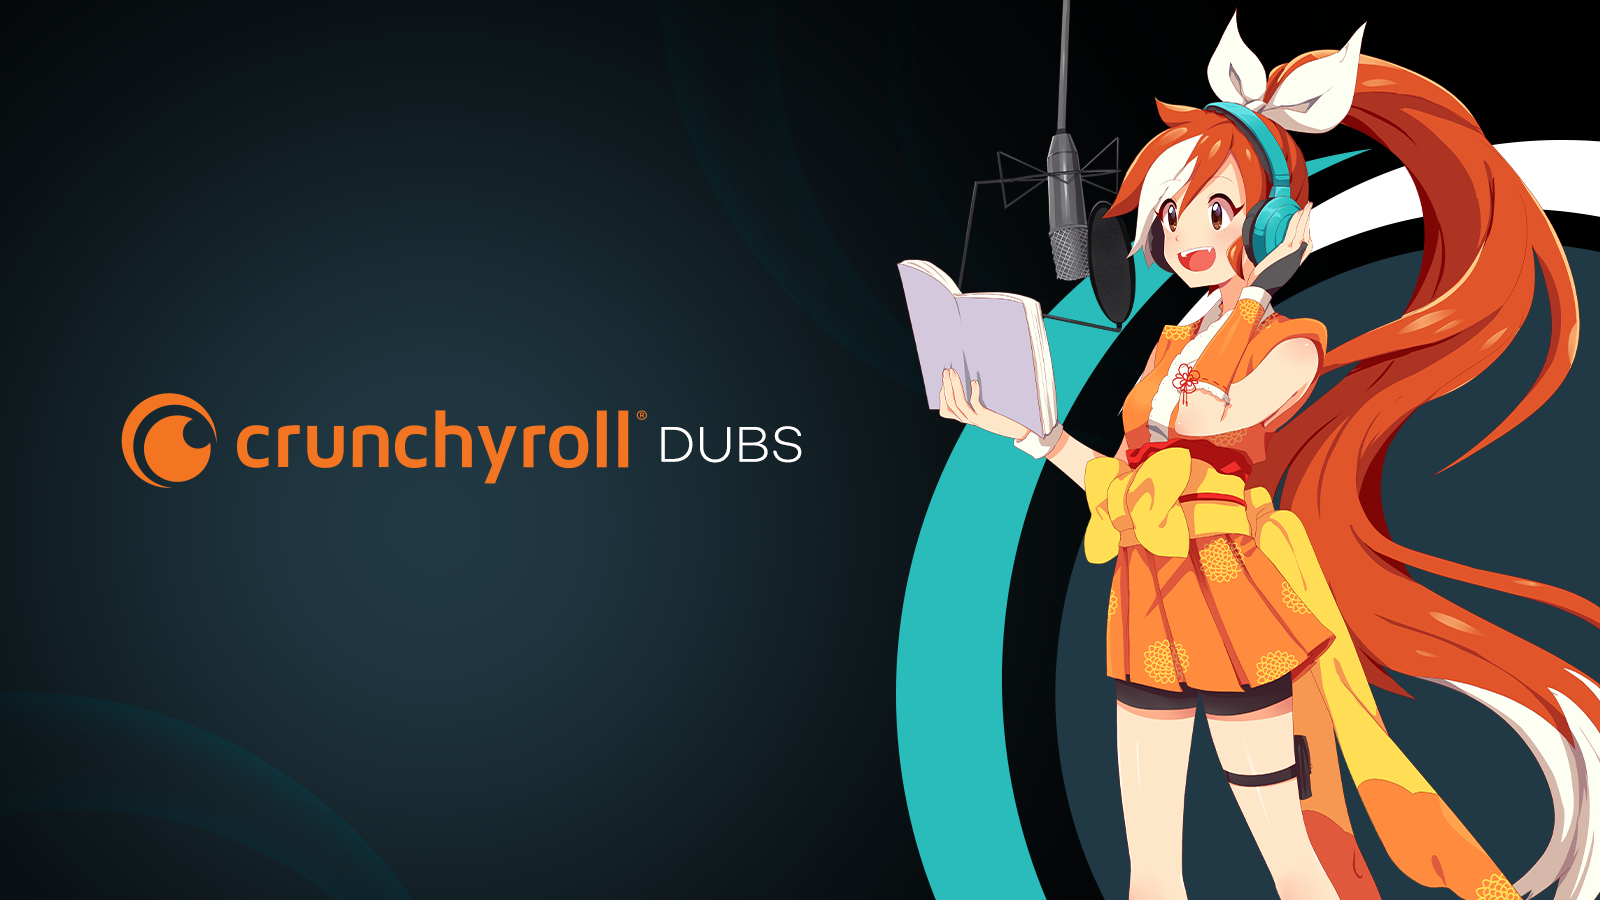 Crunchyroll - Funimation's YouTube Channel is Becoming Crunchyroll Dubs